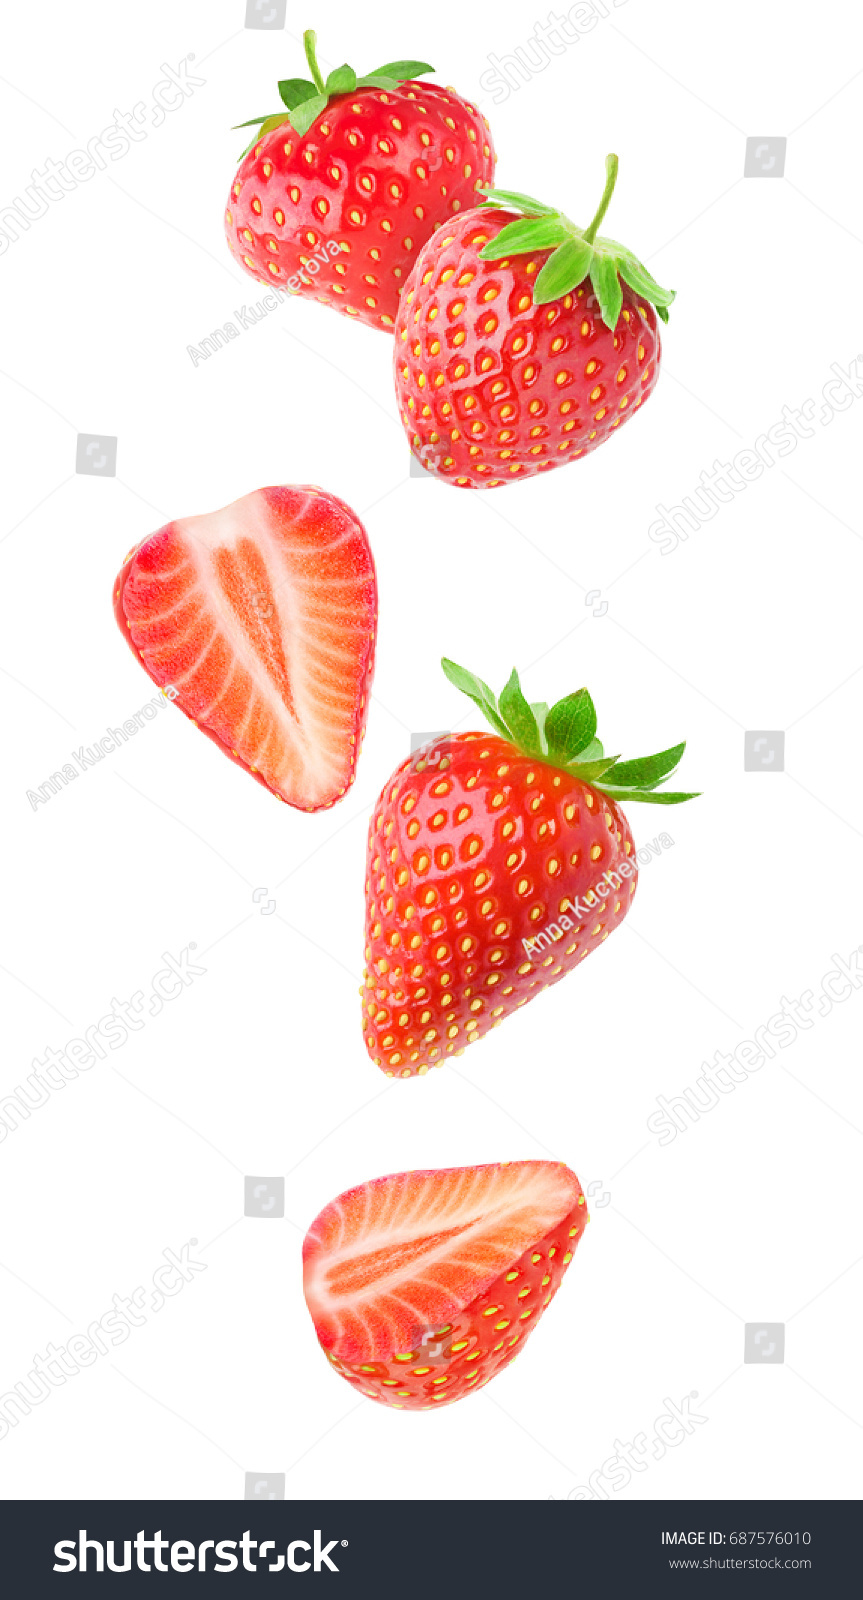 Isolated strawberries. Falling strawberry fruits whole and cut in half isolated on white background with clipping path #687576010